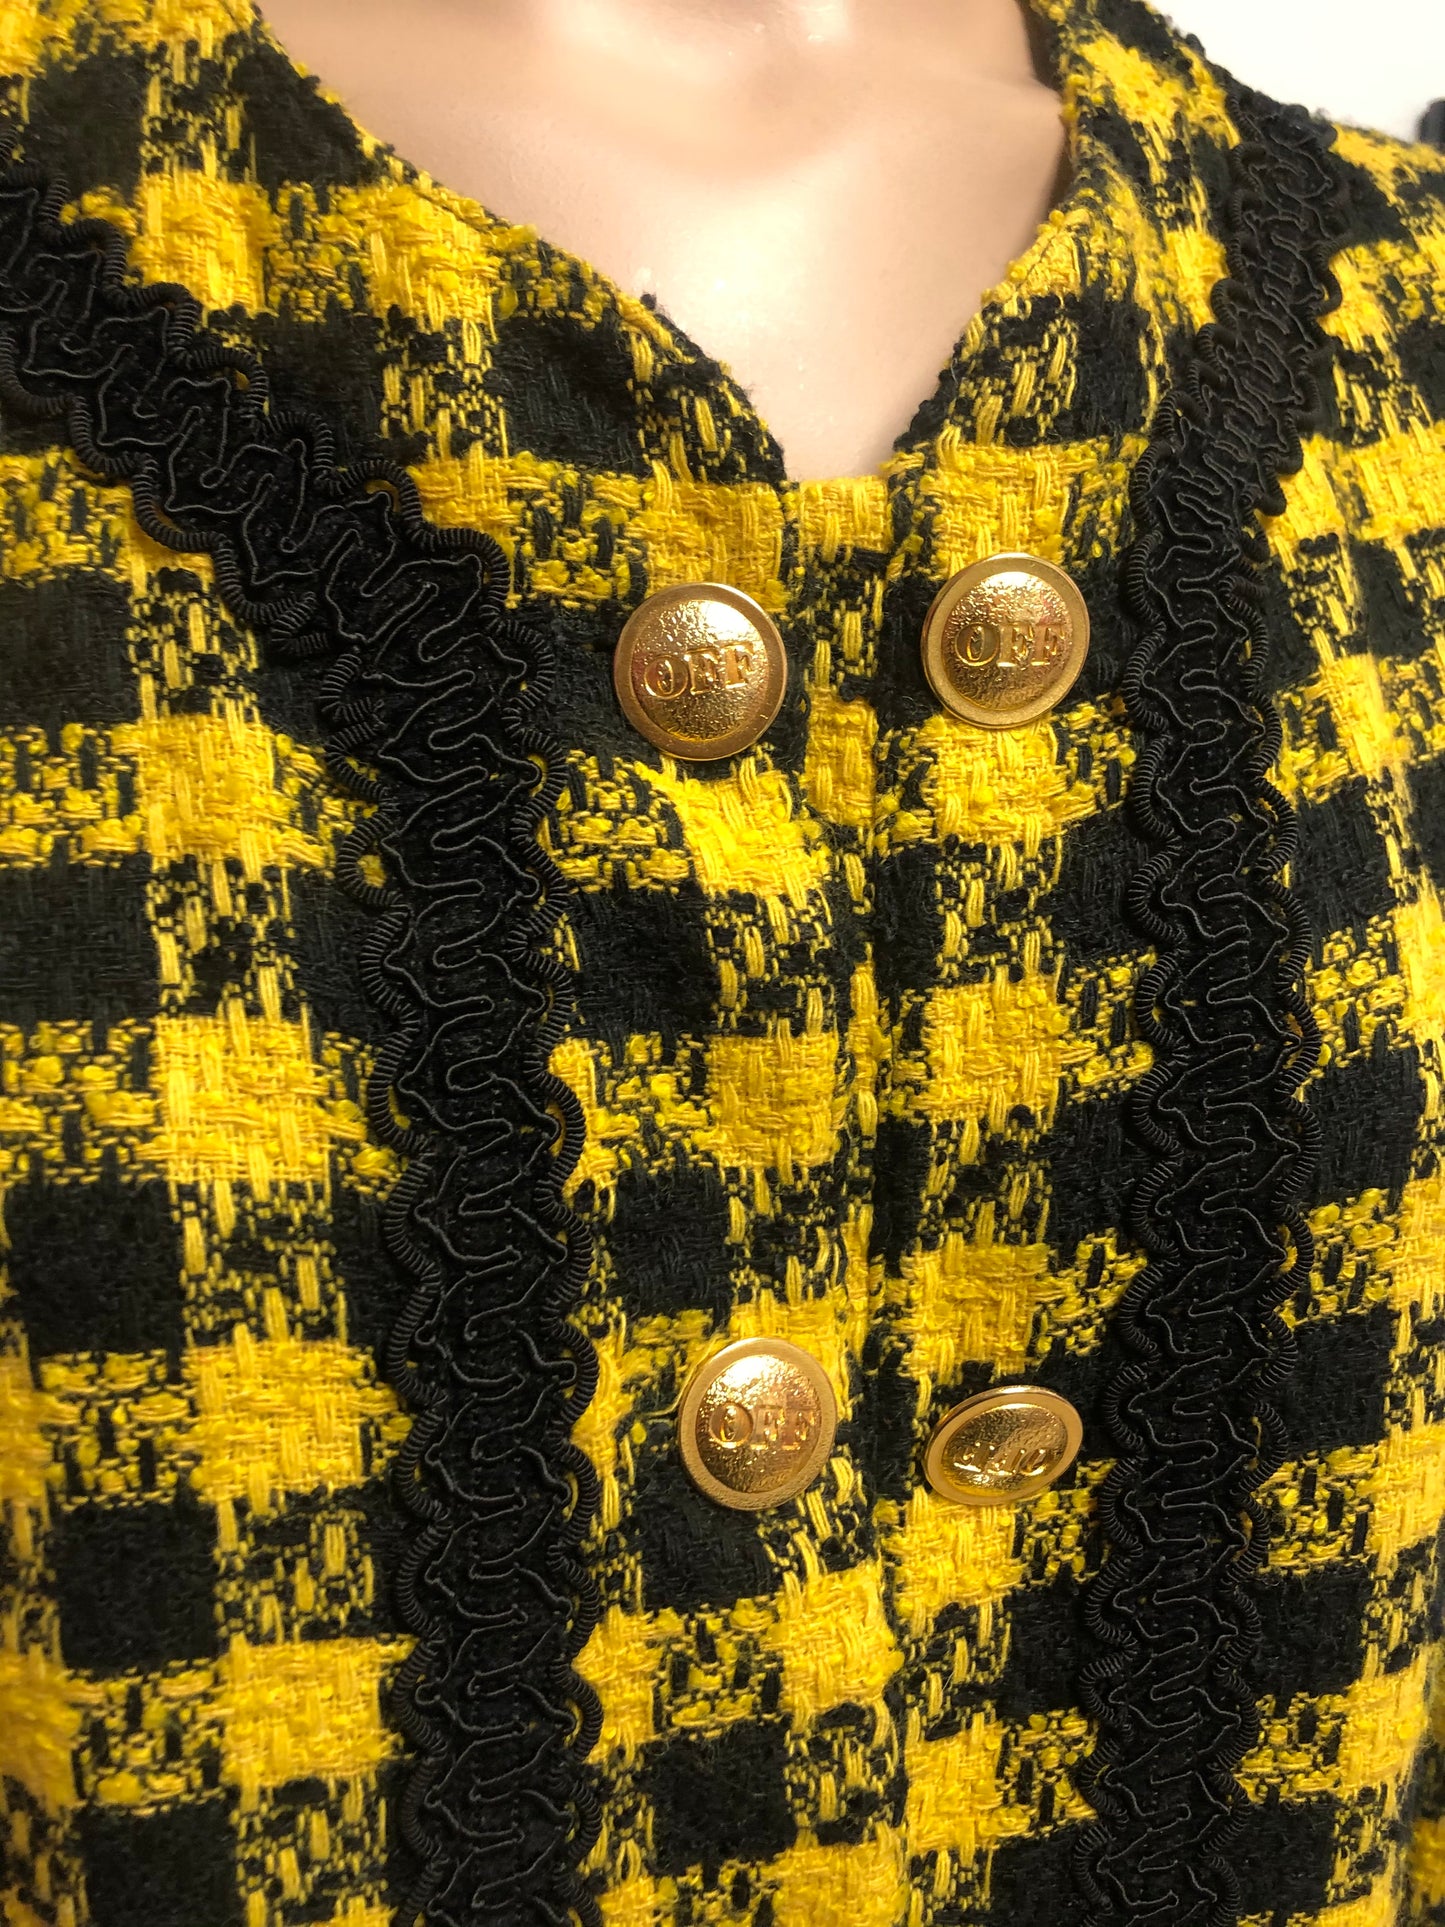 Vintage Yellow Clueless Houndstooth Cropped  Blazer Size L